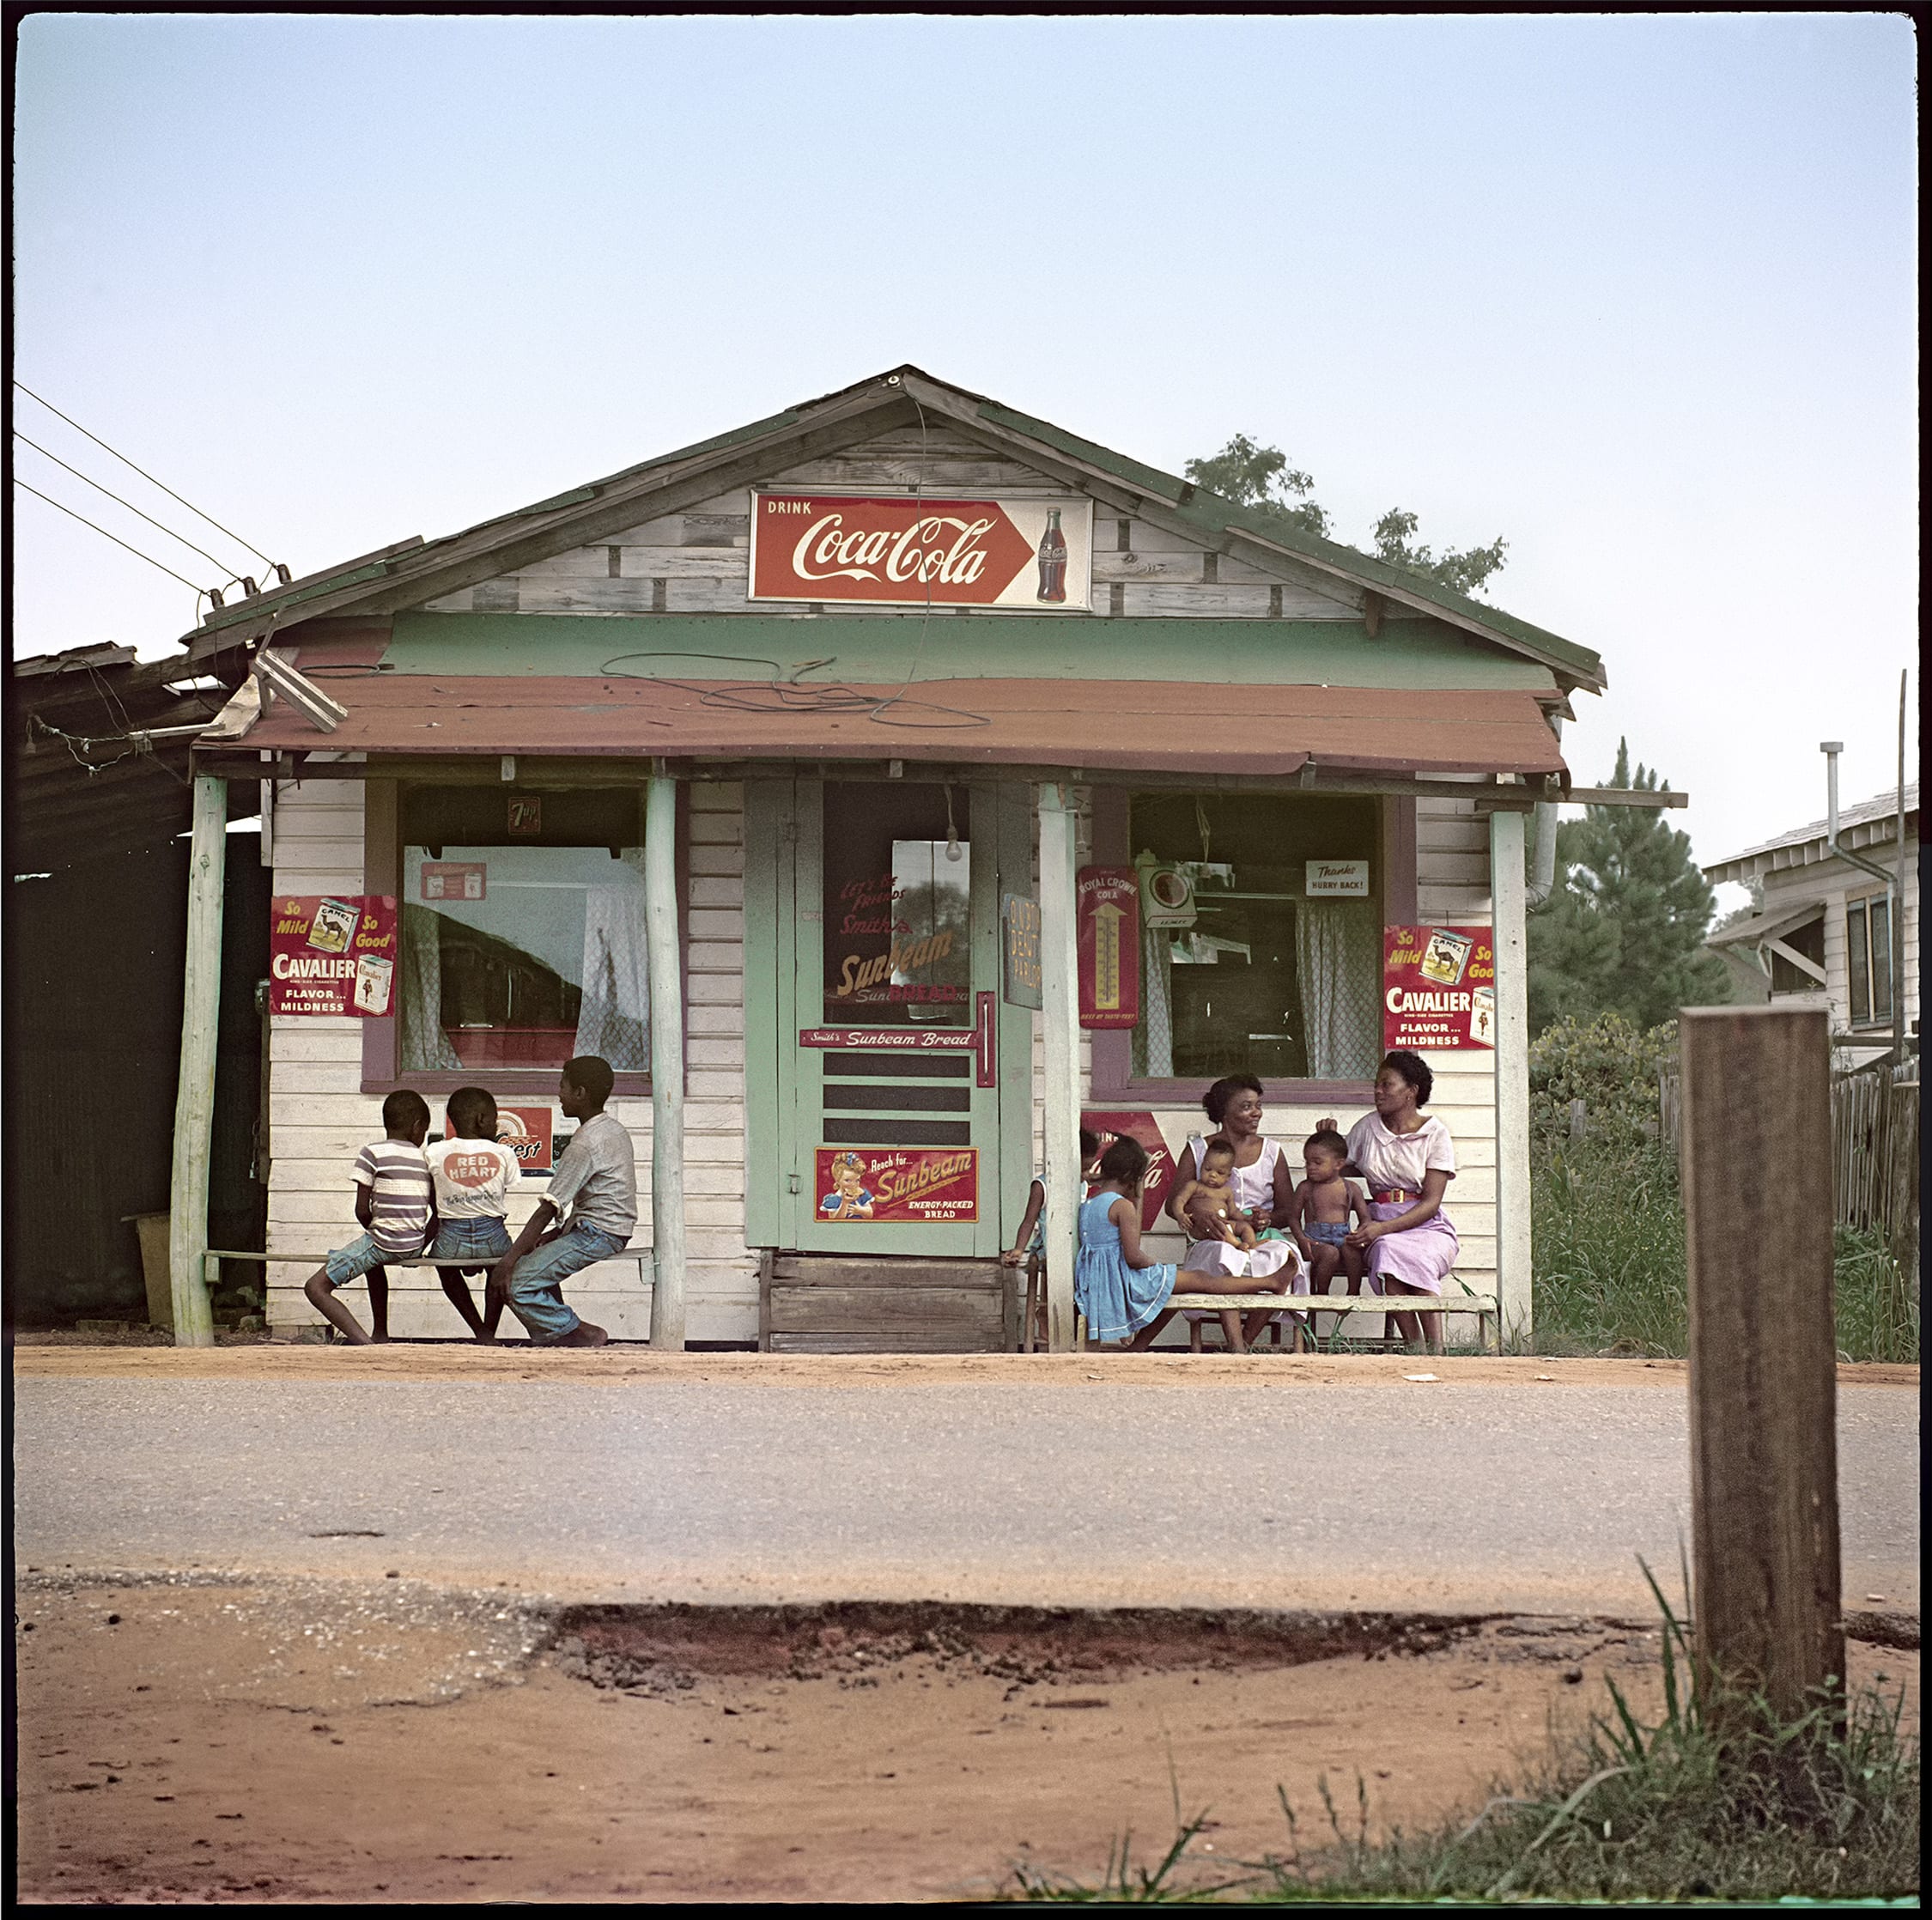 Gordon Parks (American, 1912–2006), Store Front, Mobile Alabama, 1956, courtesy of and copyright The Gordon Parks Foundation